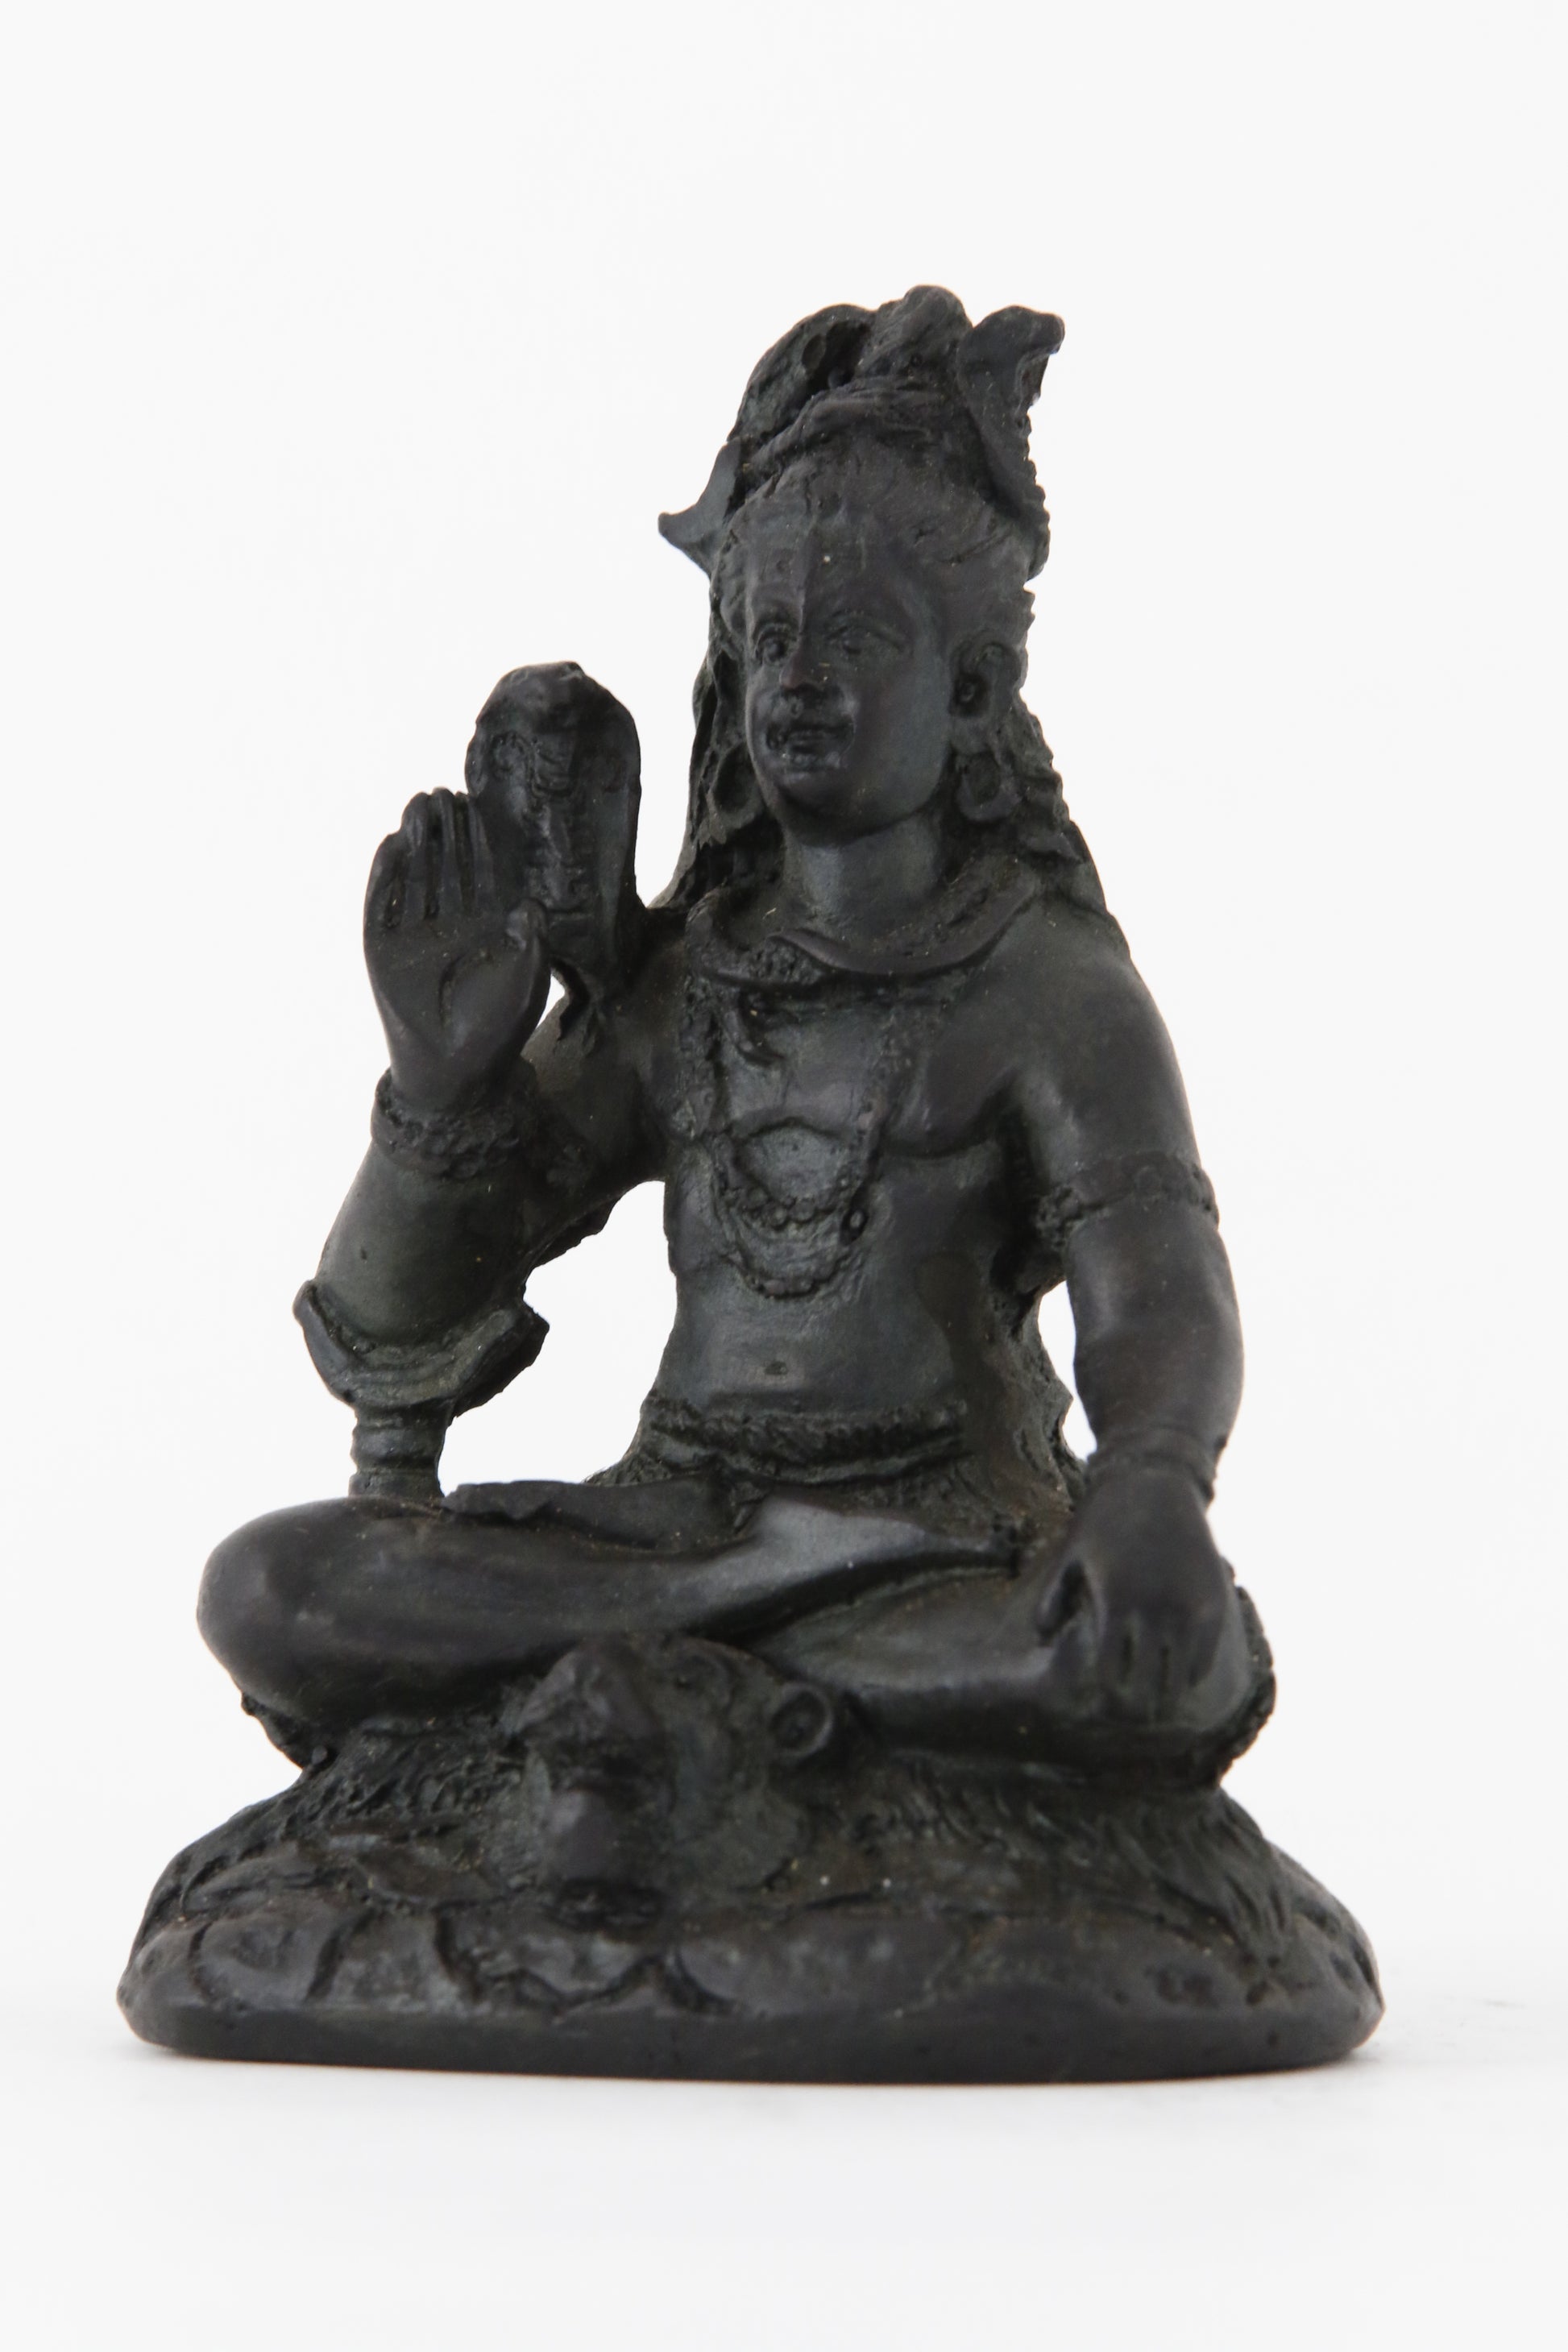 SHIVA BLESSING STATUE DARK SMALL SIZE SIDE VIEW